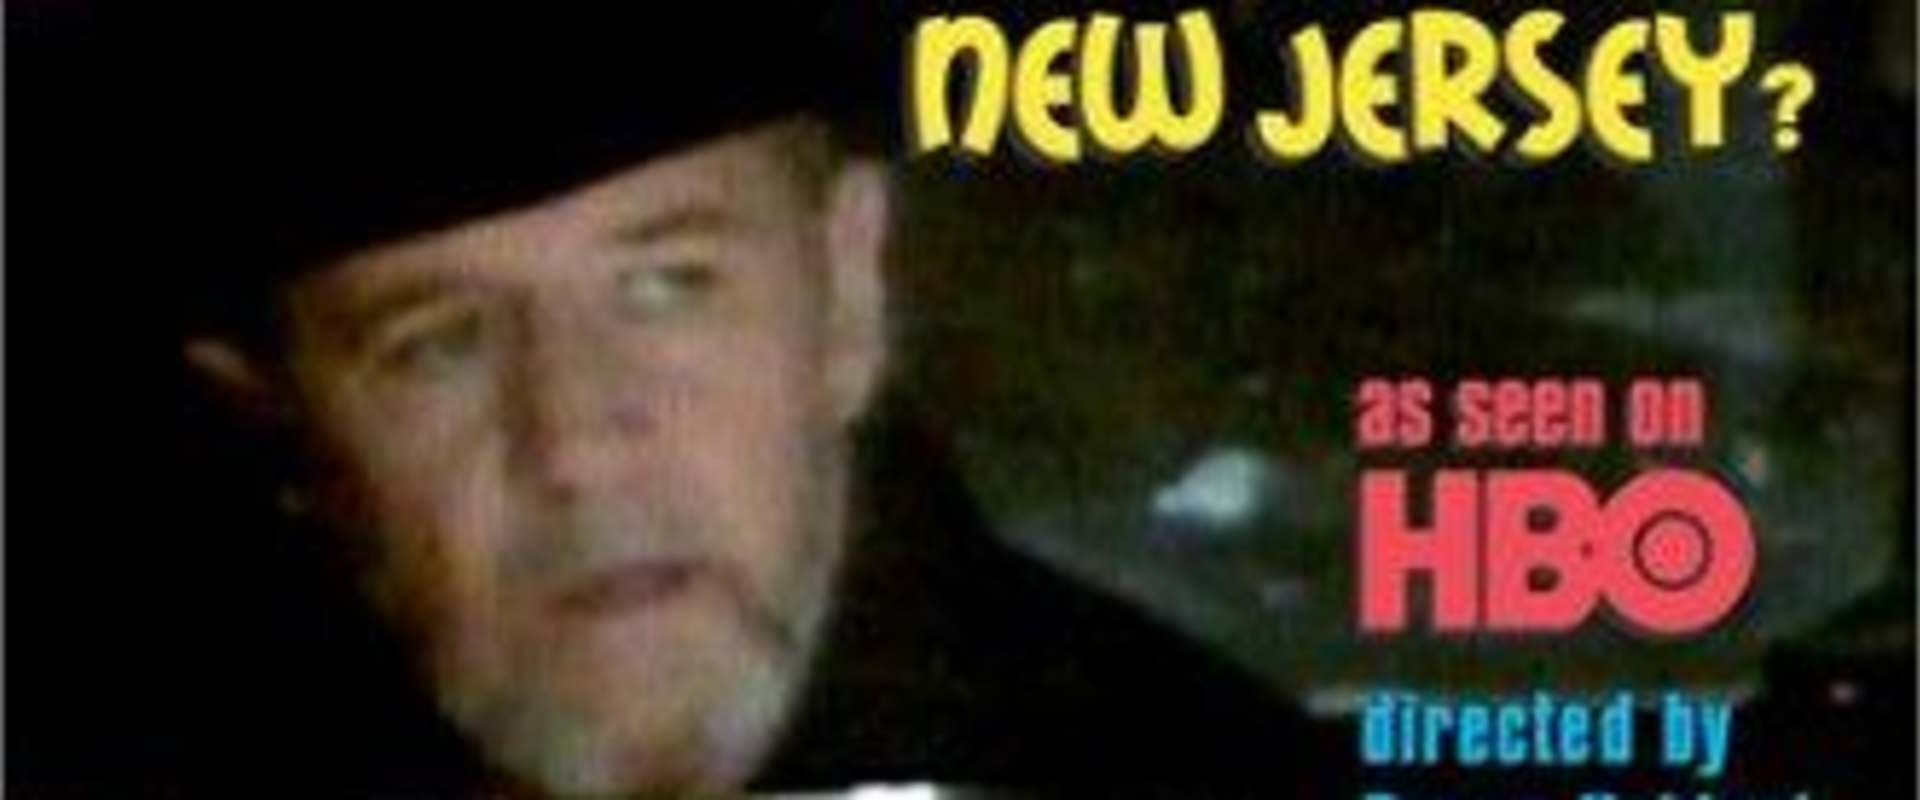 George Carlin: What Am I Doing in New Jersey? background 2